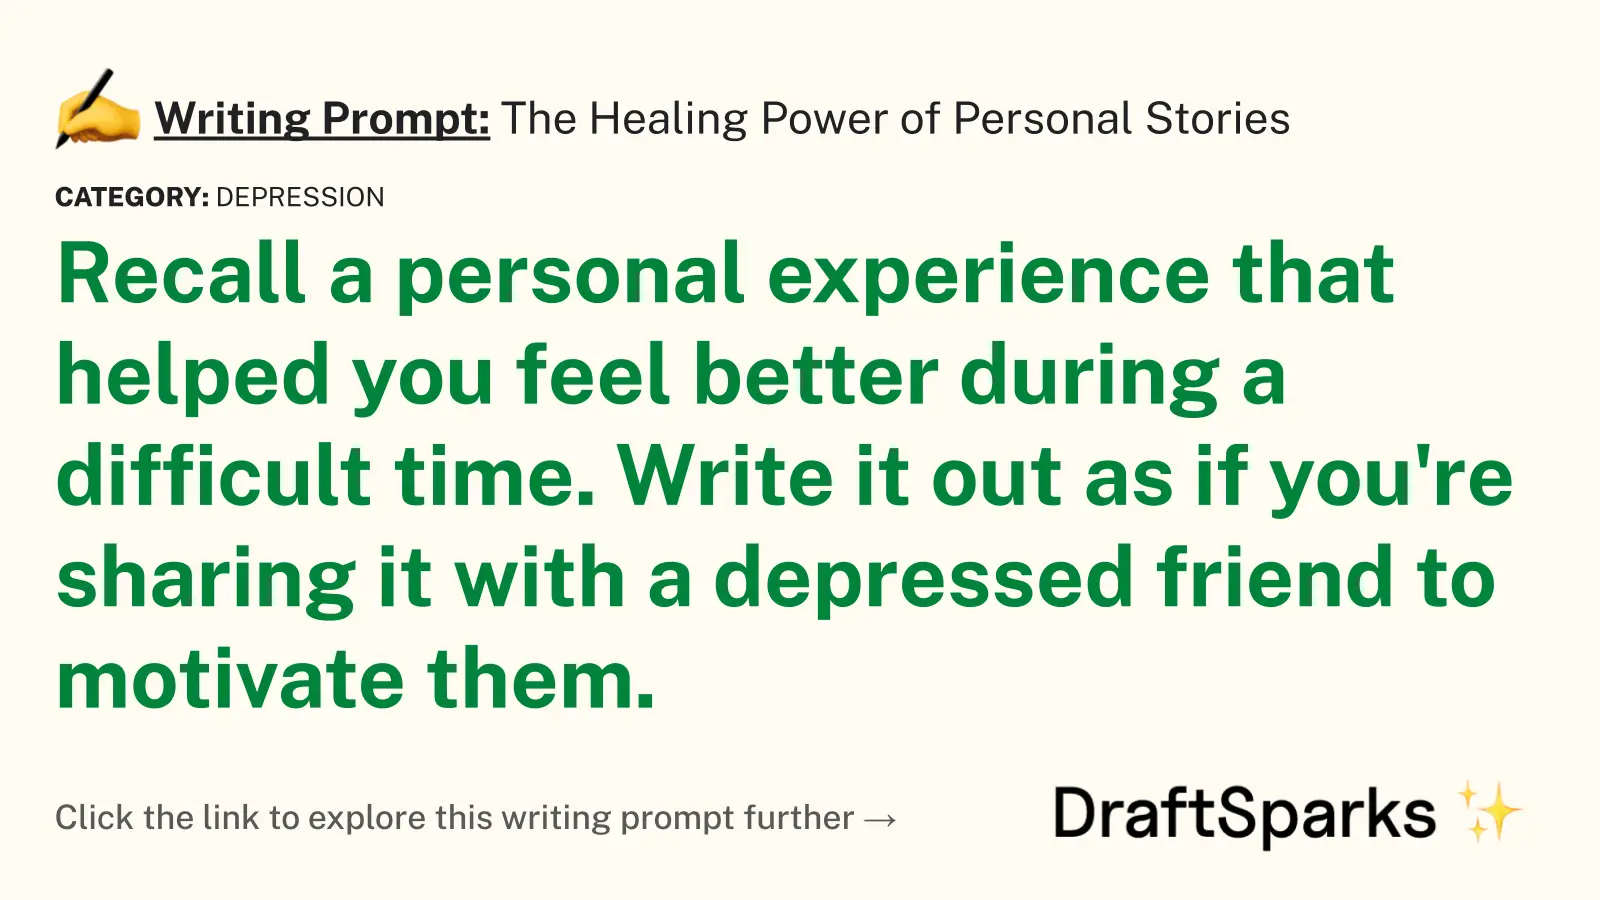 The Healing Power of Personal Stories